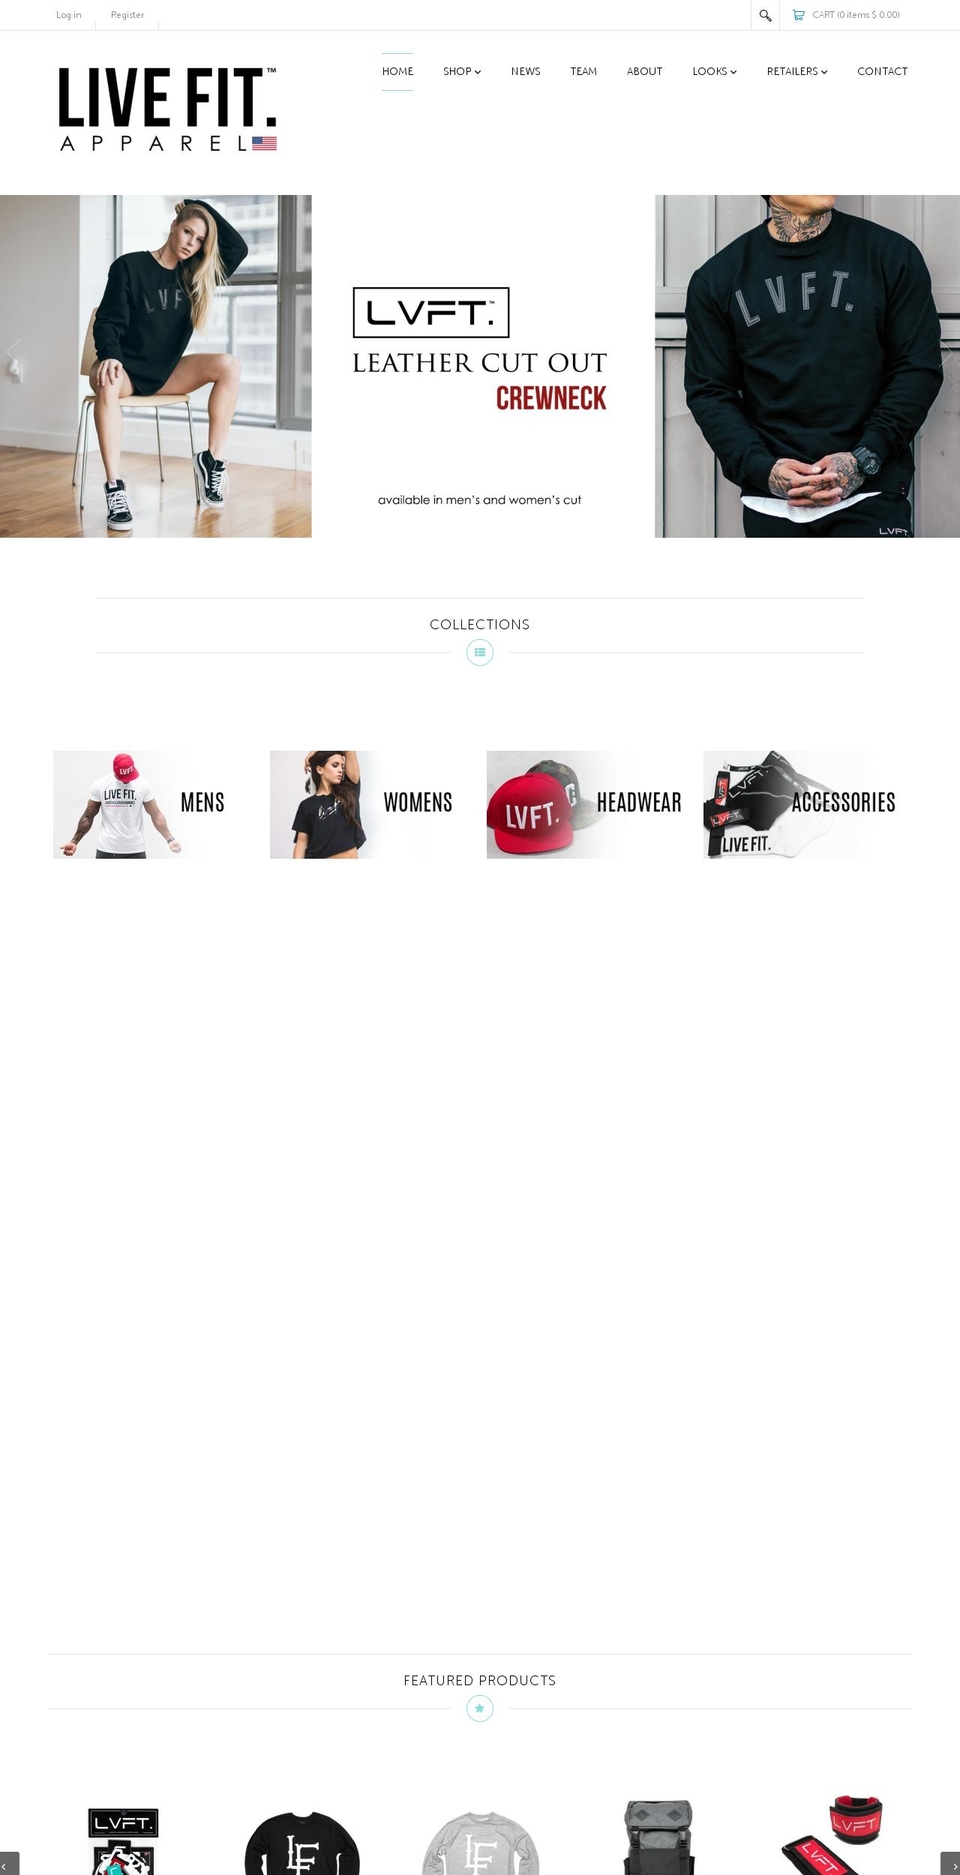 Updated Site - One Source  - Power Tools Shopify theme site example live-fit-apparel.myshopify.com